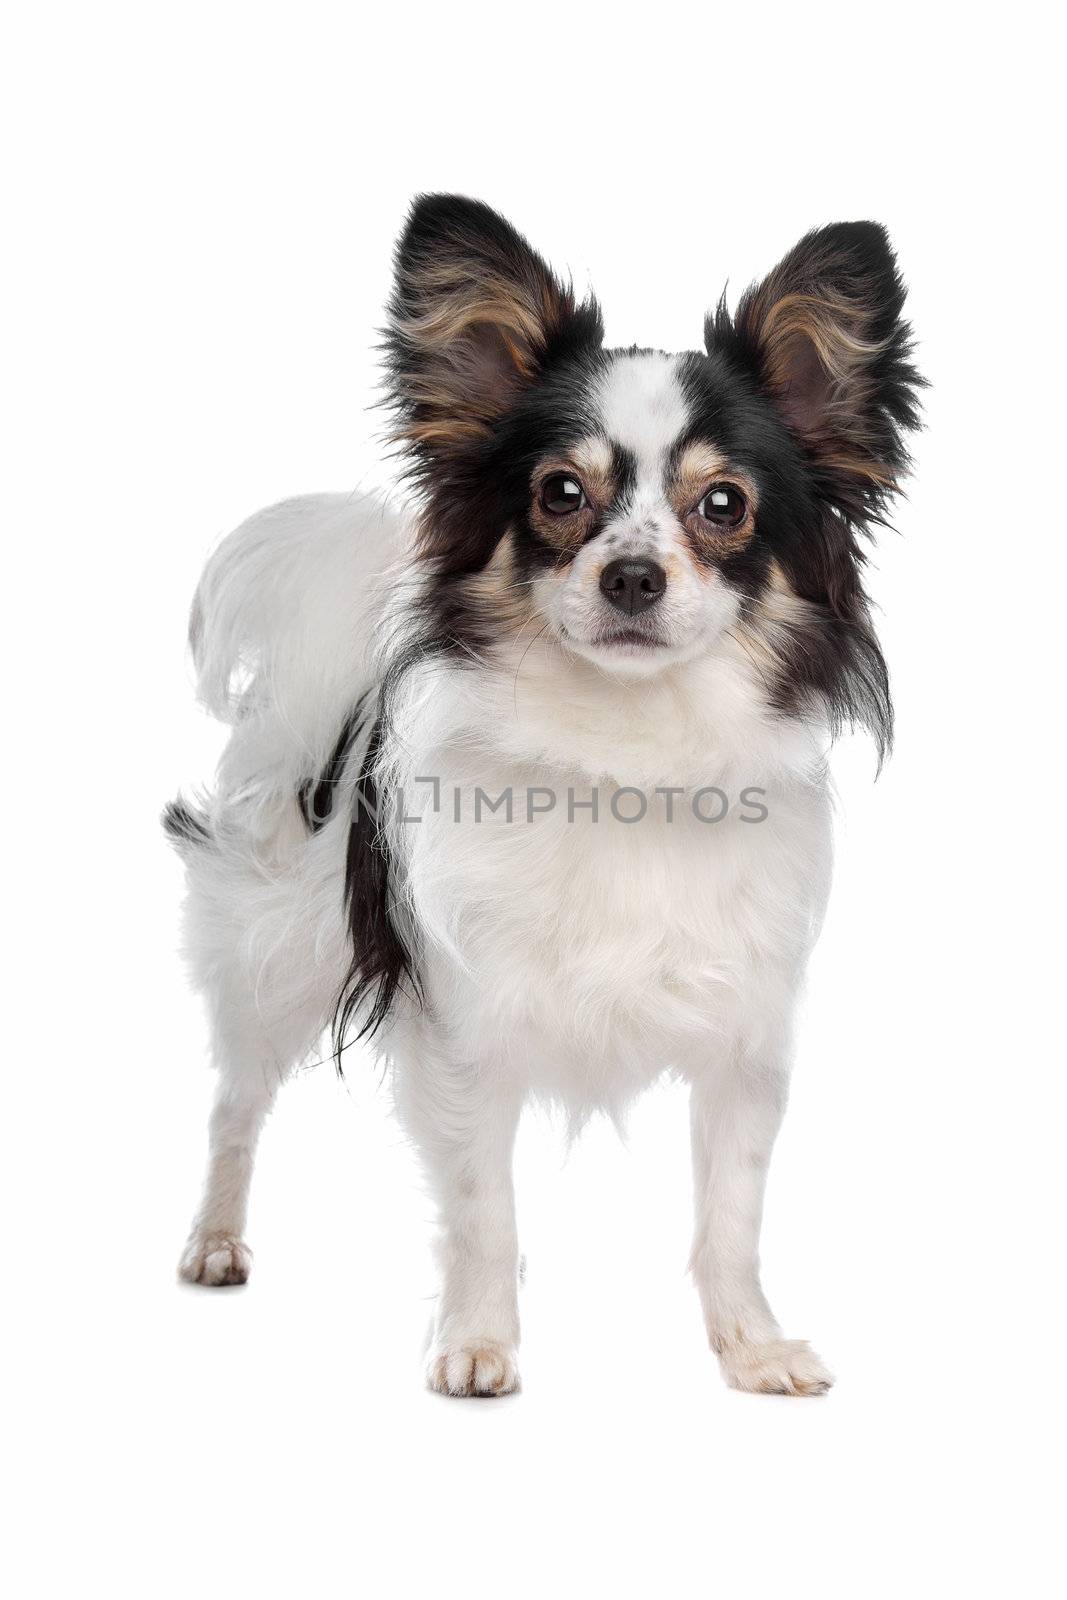 papillon or Butterfly Dog  in front of a white background